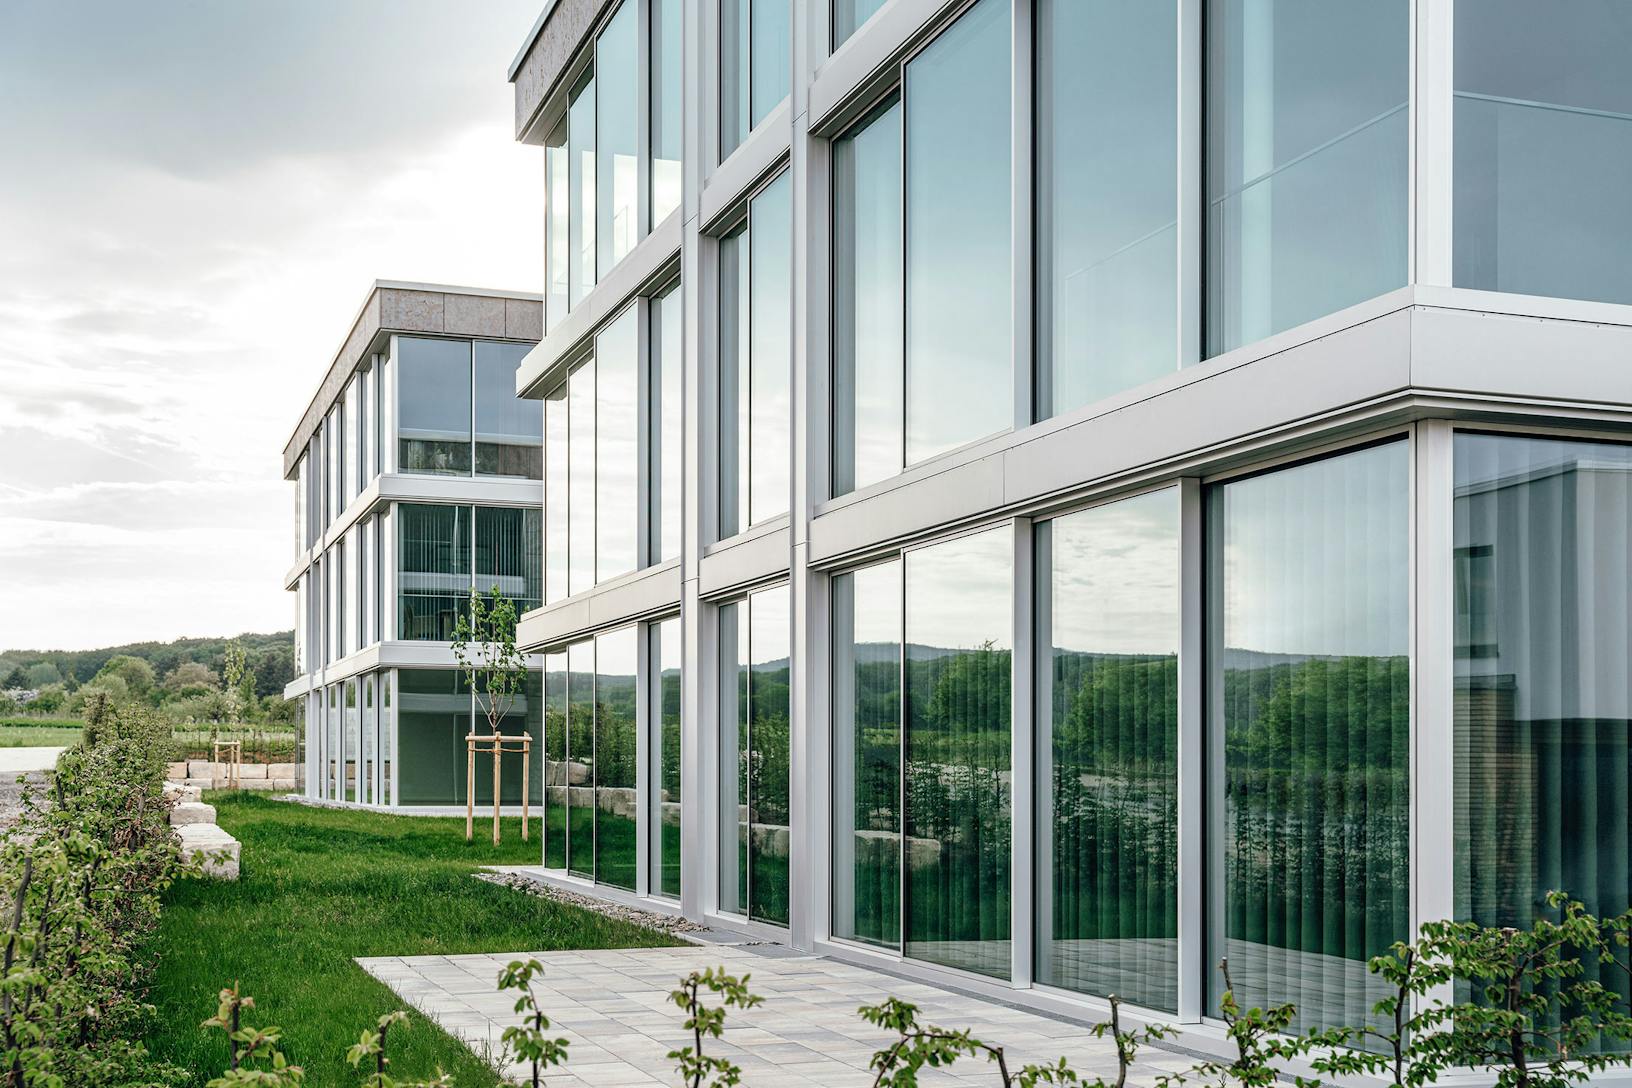 A modern condo building with minimal sliding glass walls, surrounded by a grassy area.